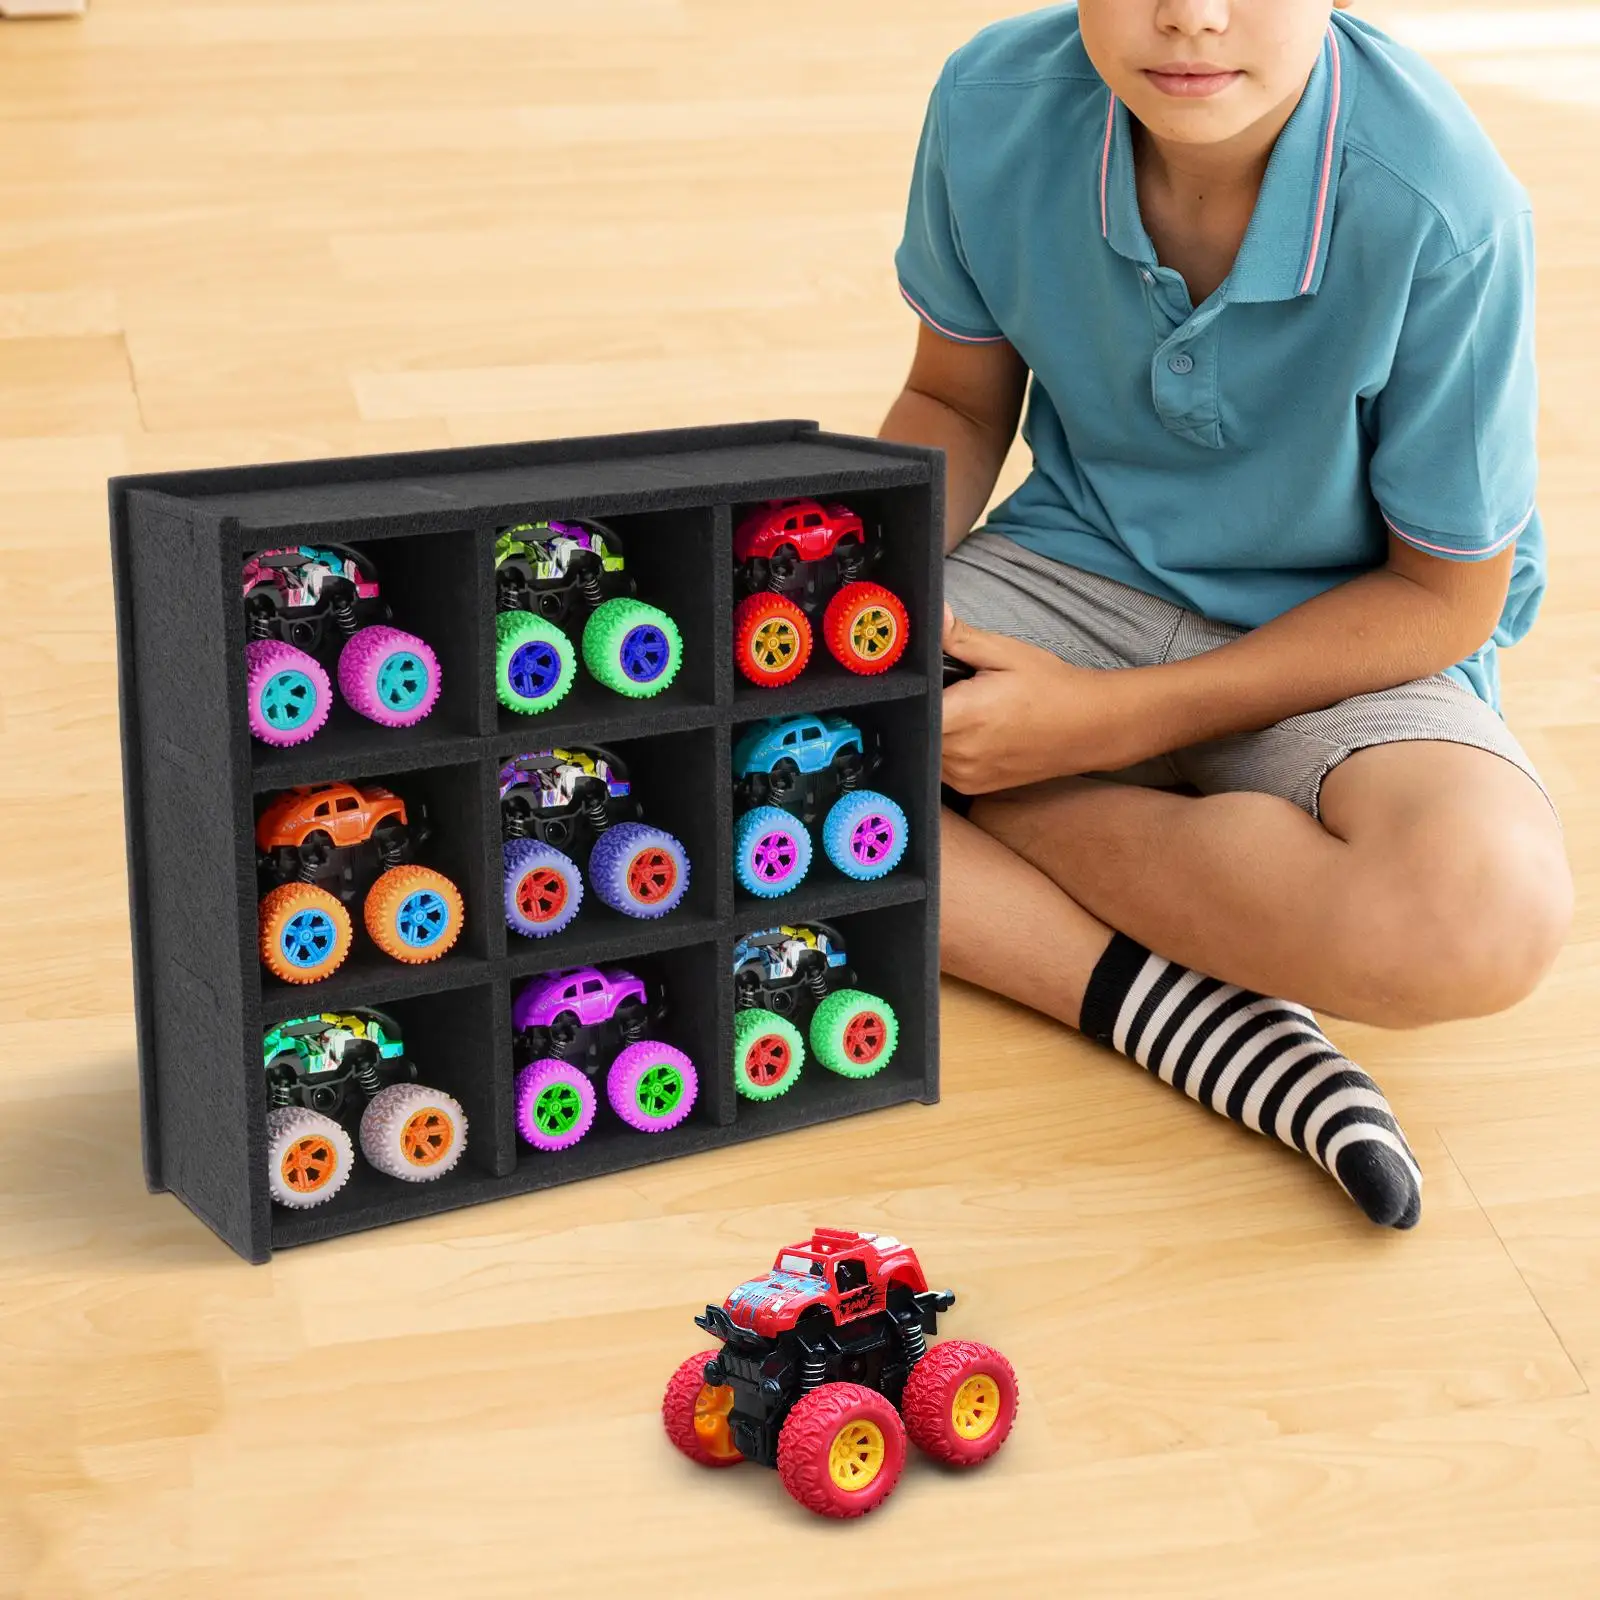 Monster Trucks Toy Wall Mounted Display Case with 9 Slots Felt Material for Children Multifunctional Accessory Convenient